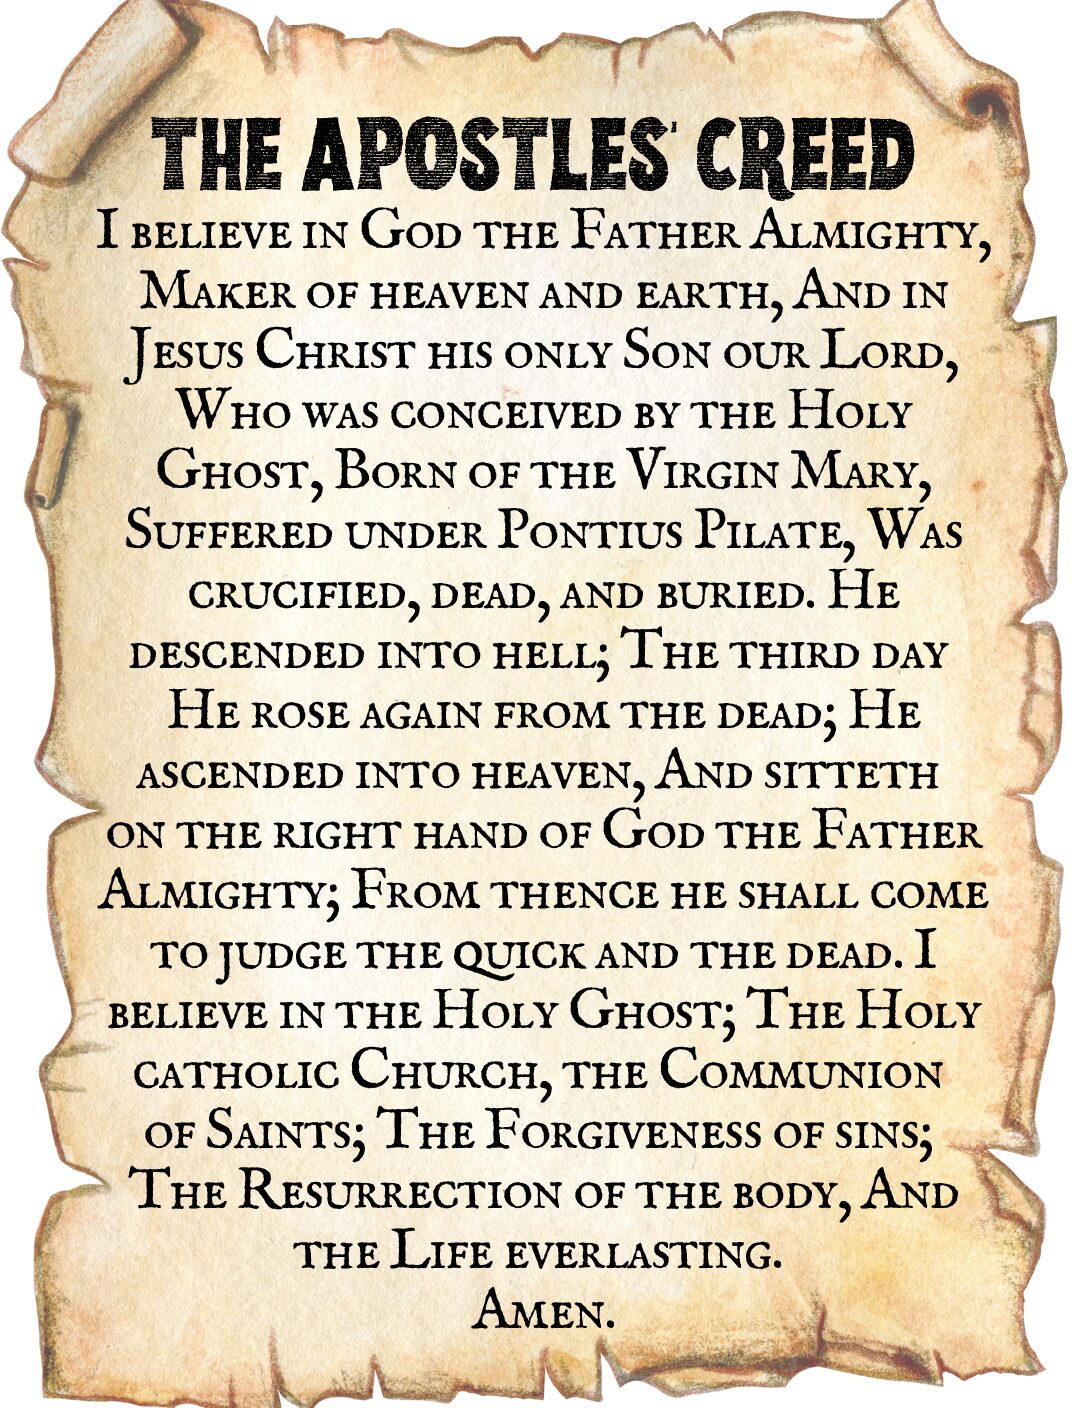 Is The Apostles Creed A Prayer